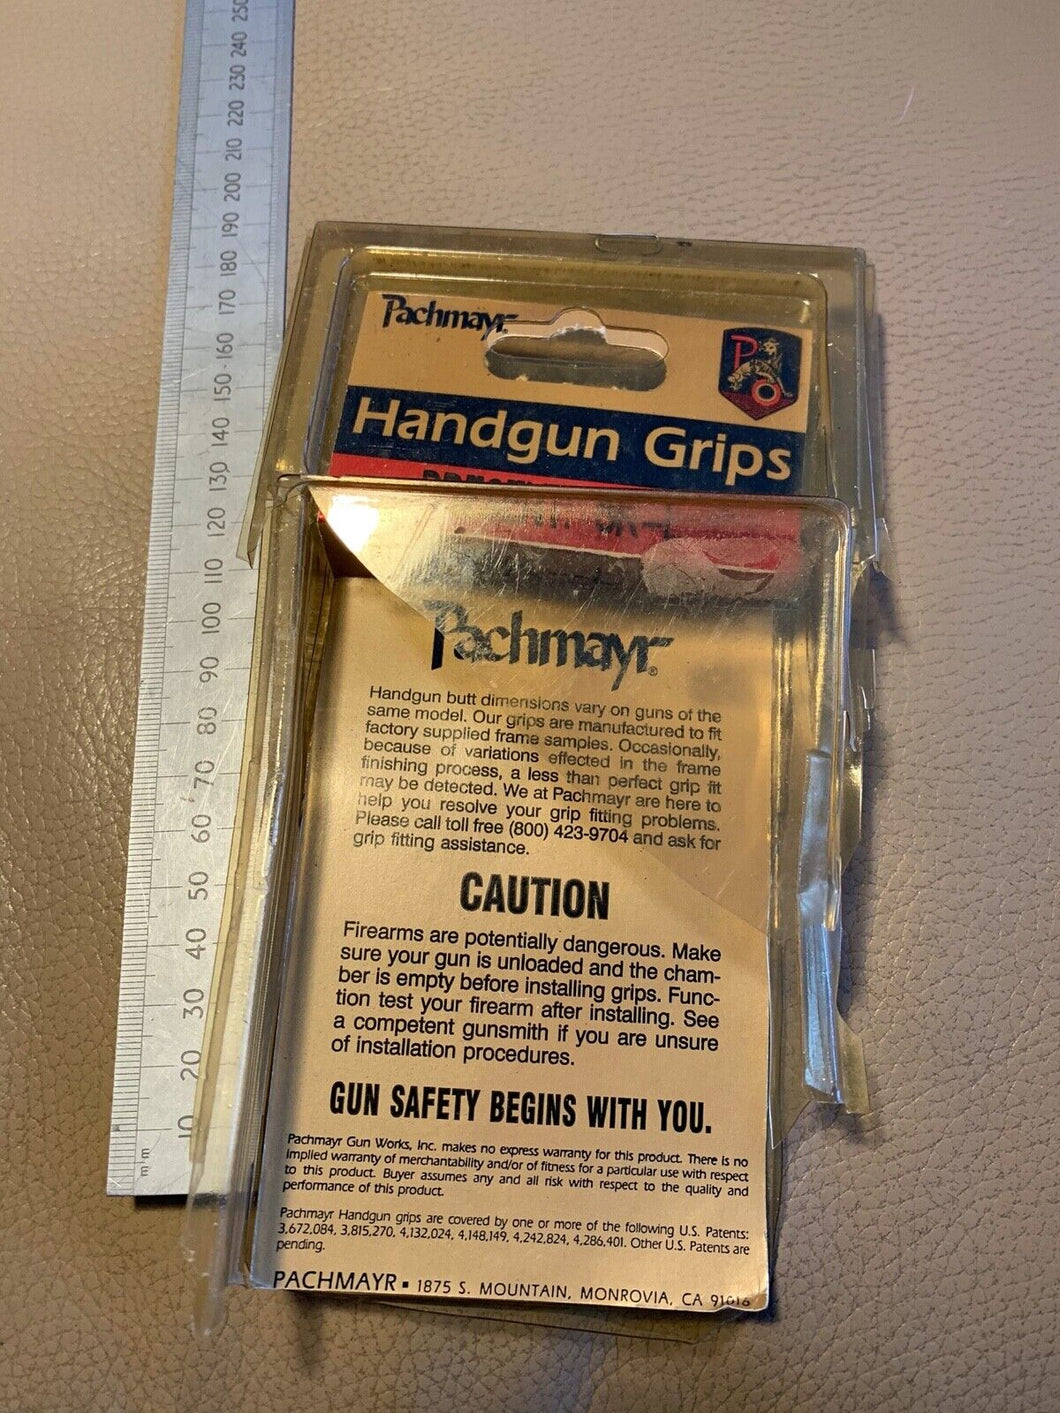 An original Pachmayr Pistol Grip Box and packaging - Empty